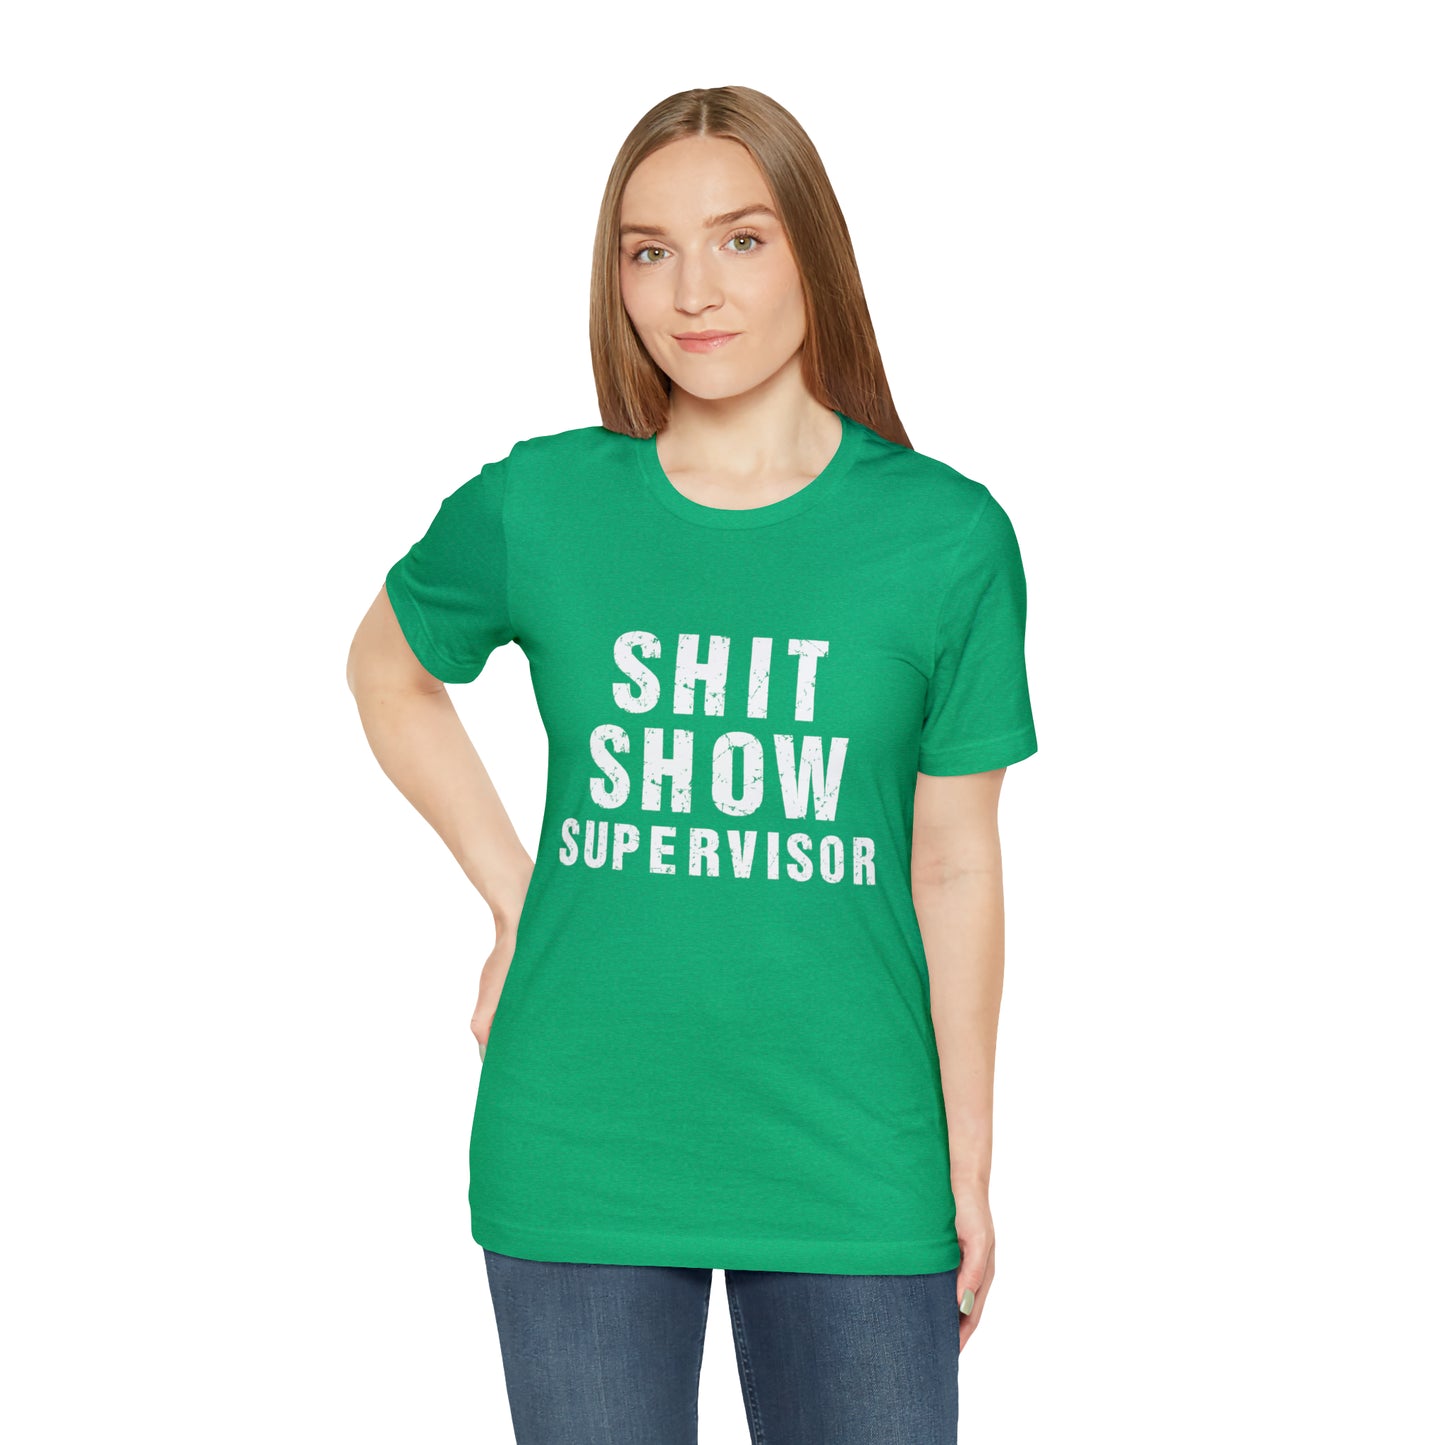 Shit Show Supervisor Tshirt, Funny Shirt, Fun Shirt, Gift for him, Gift for her, gift for a friend